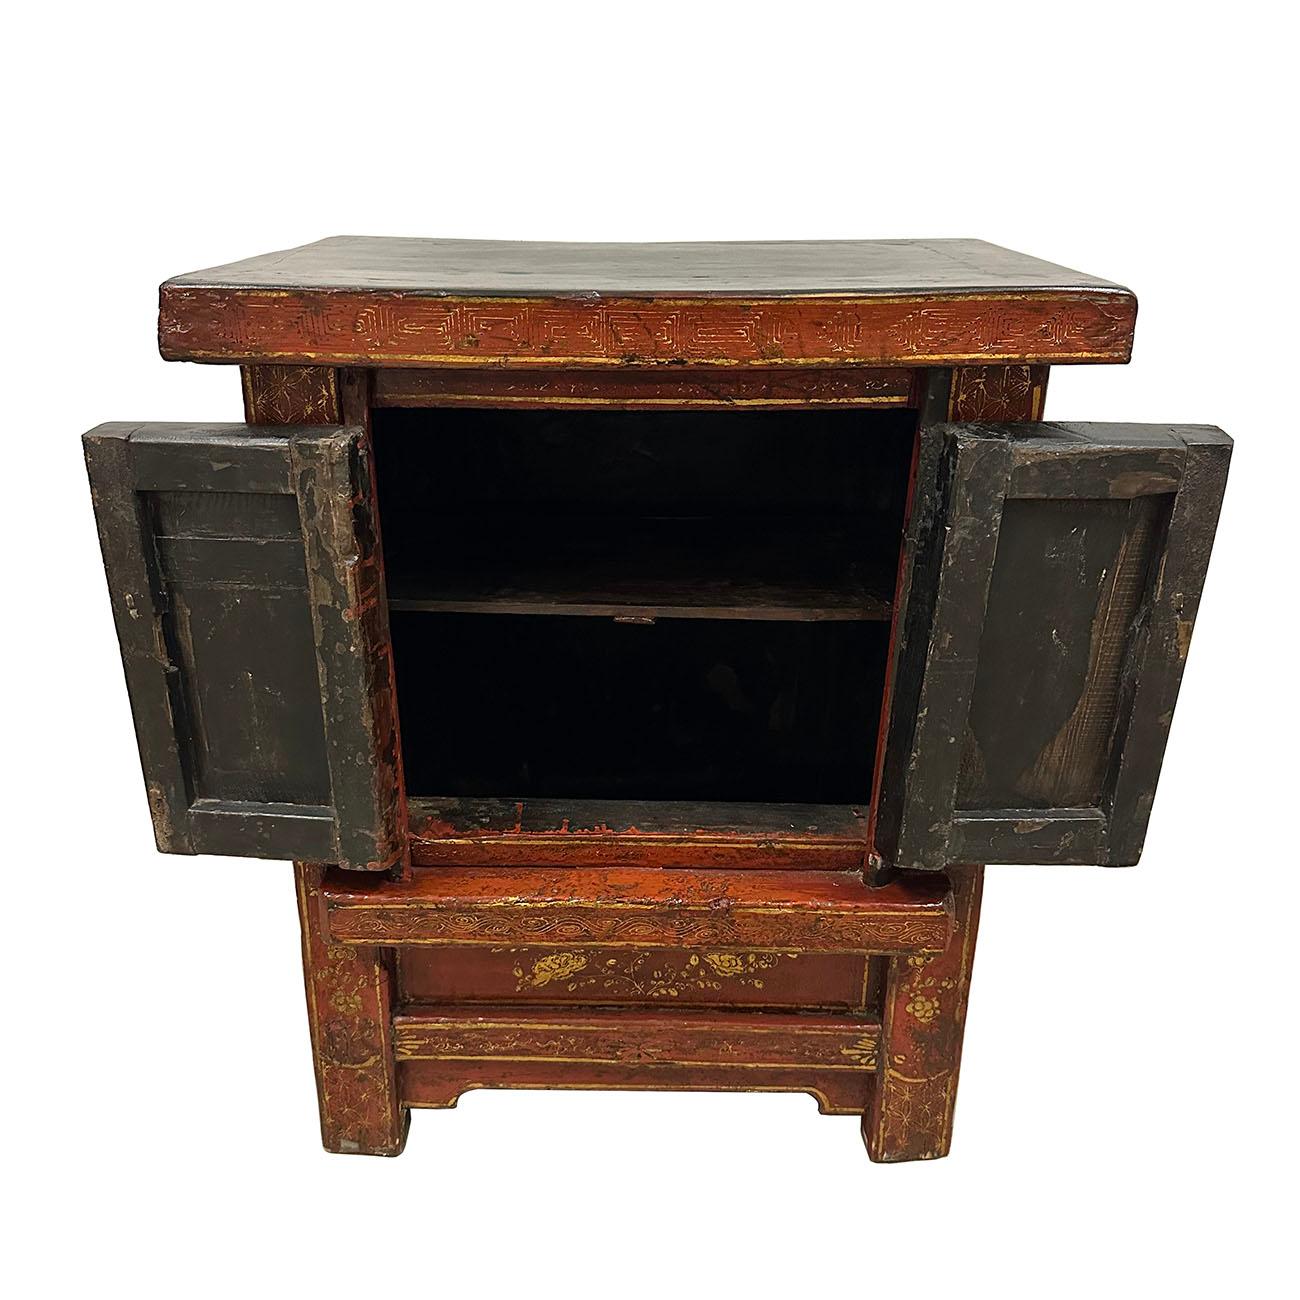 Chinese Export Chinese Late Qing Dynasty Bedside Wooden Cabinet with Period Painting Art Works For Sale